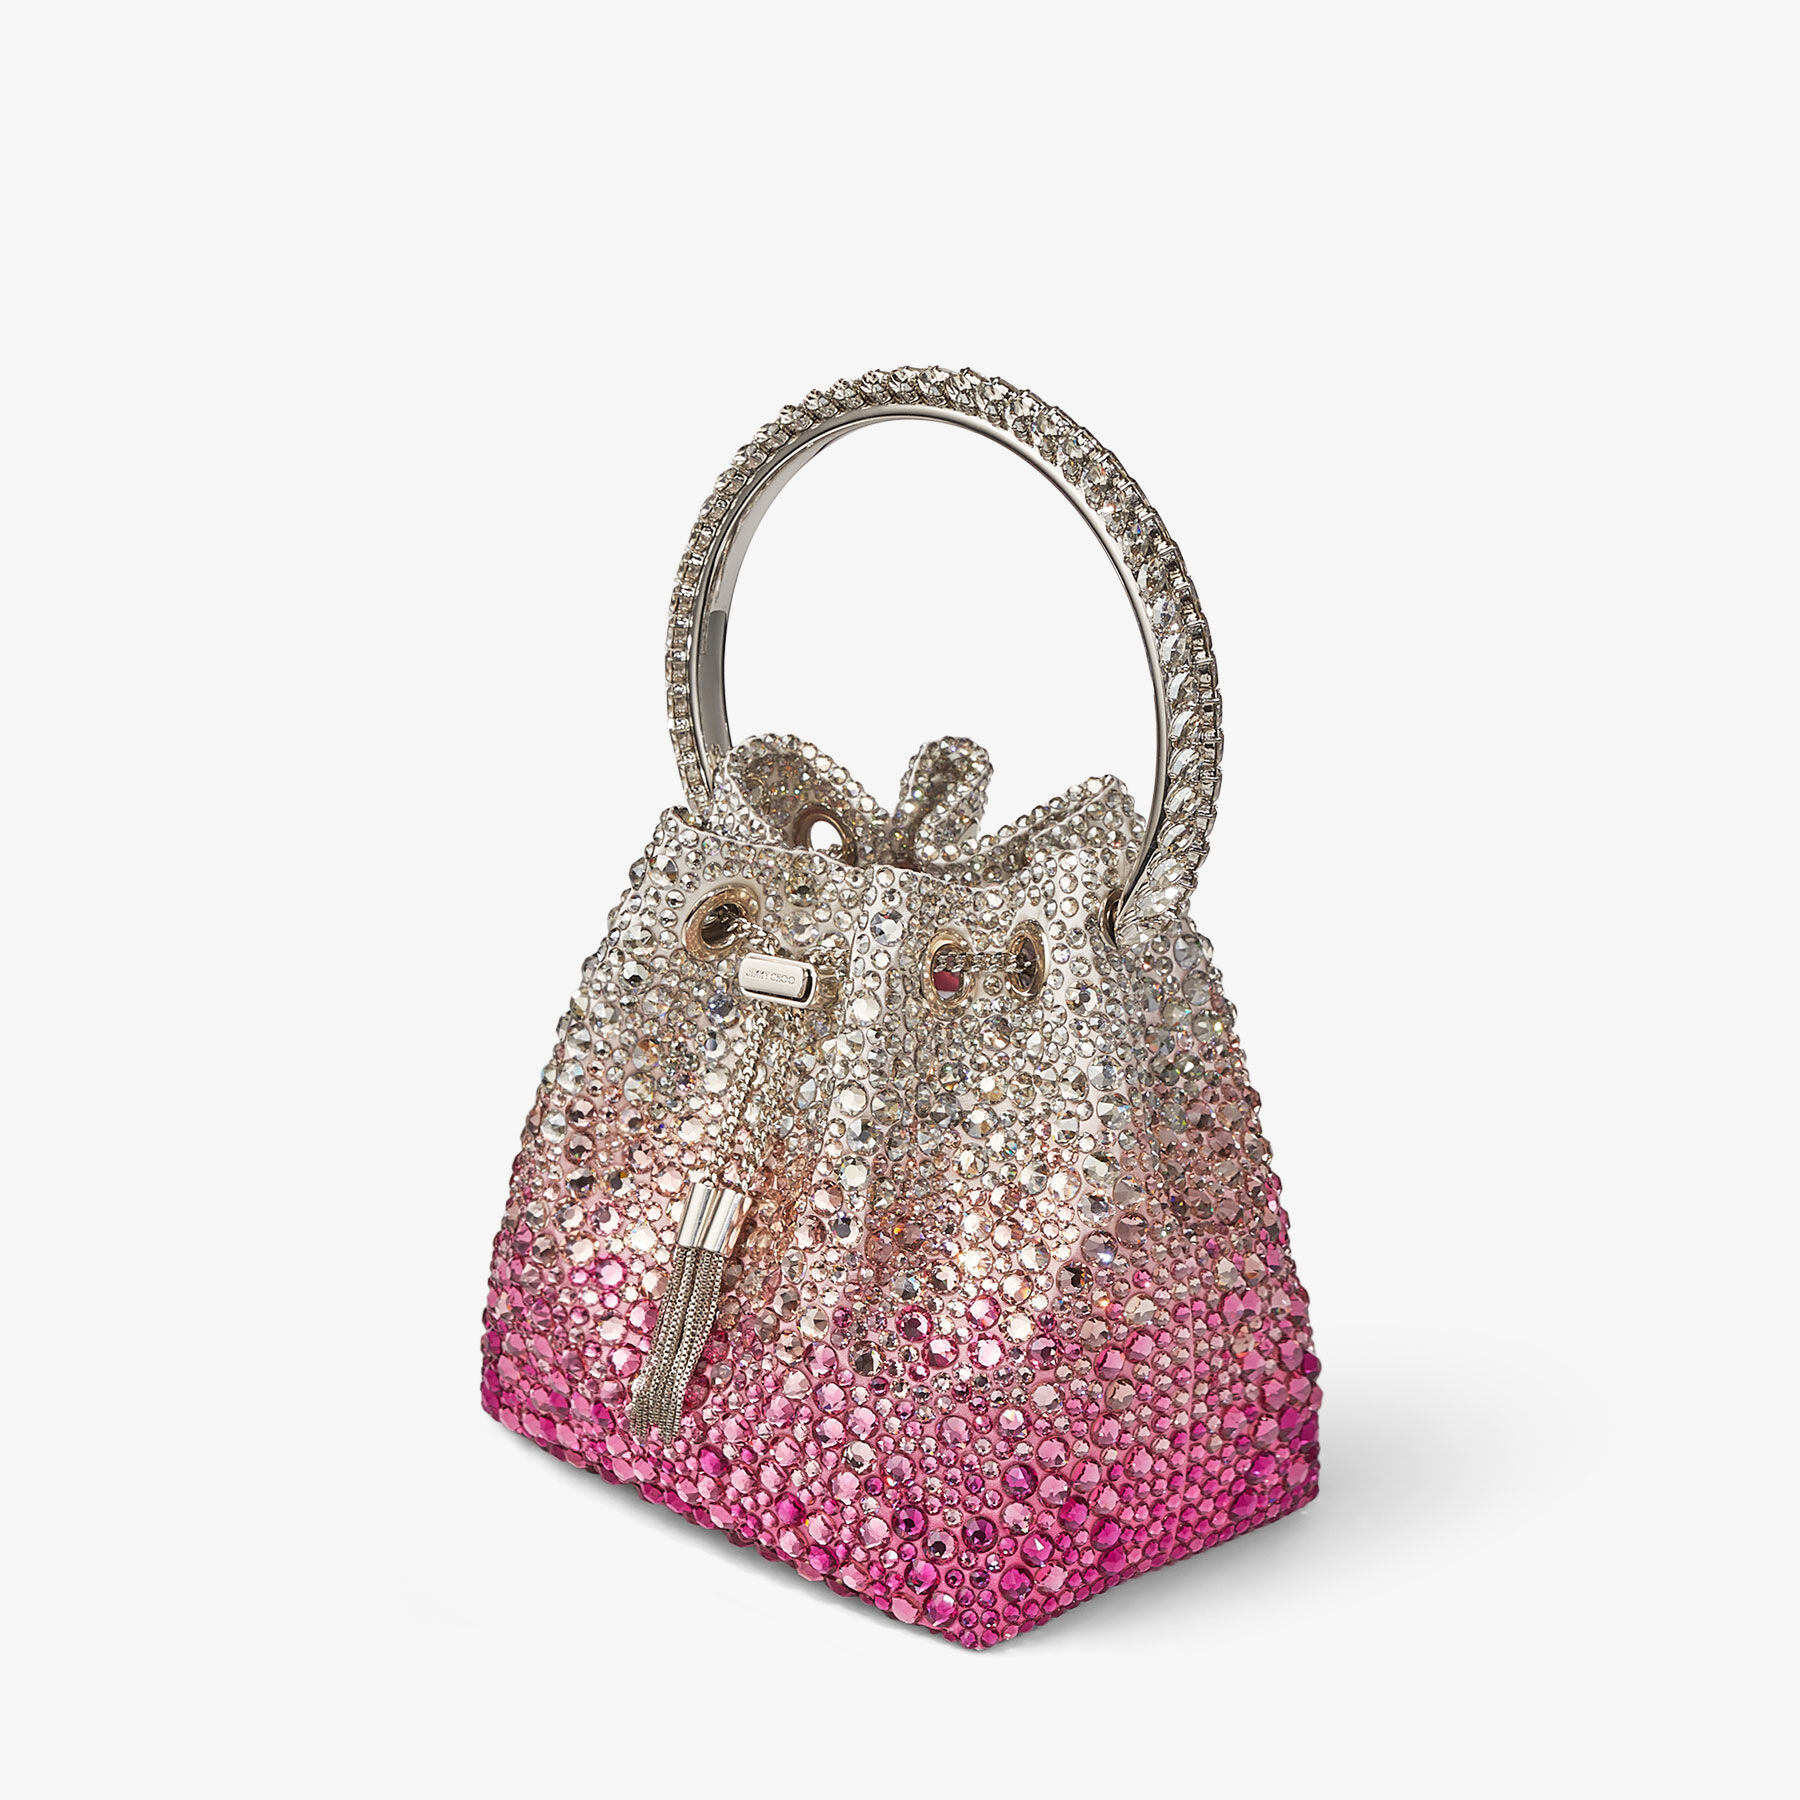 BON BON | Candy Pink and Silver Satin Bag withcrystals | JIMMY CHOO